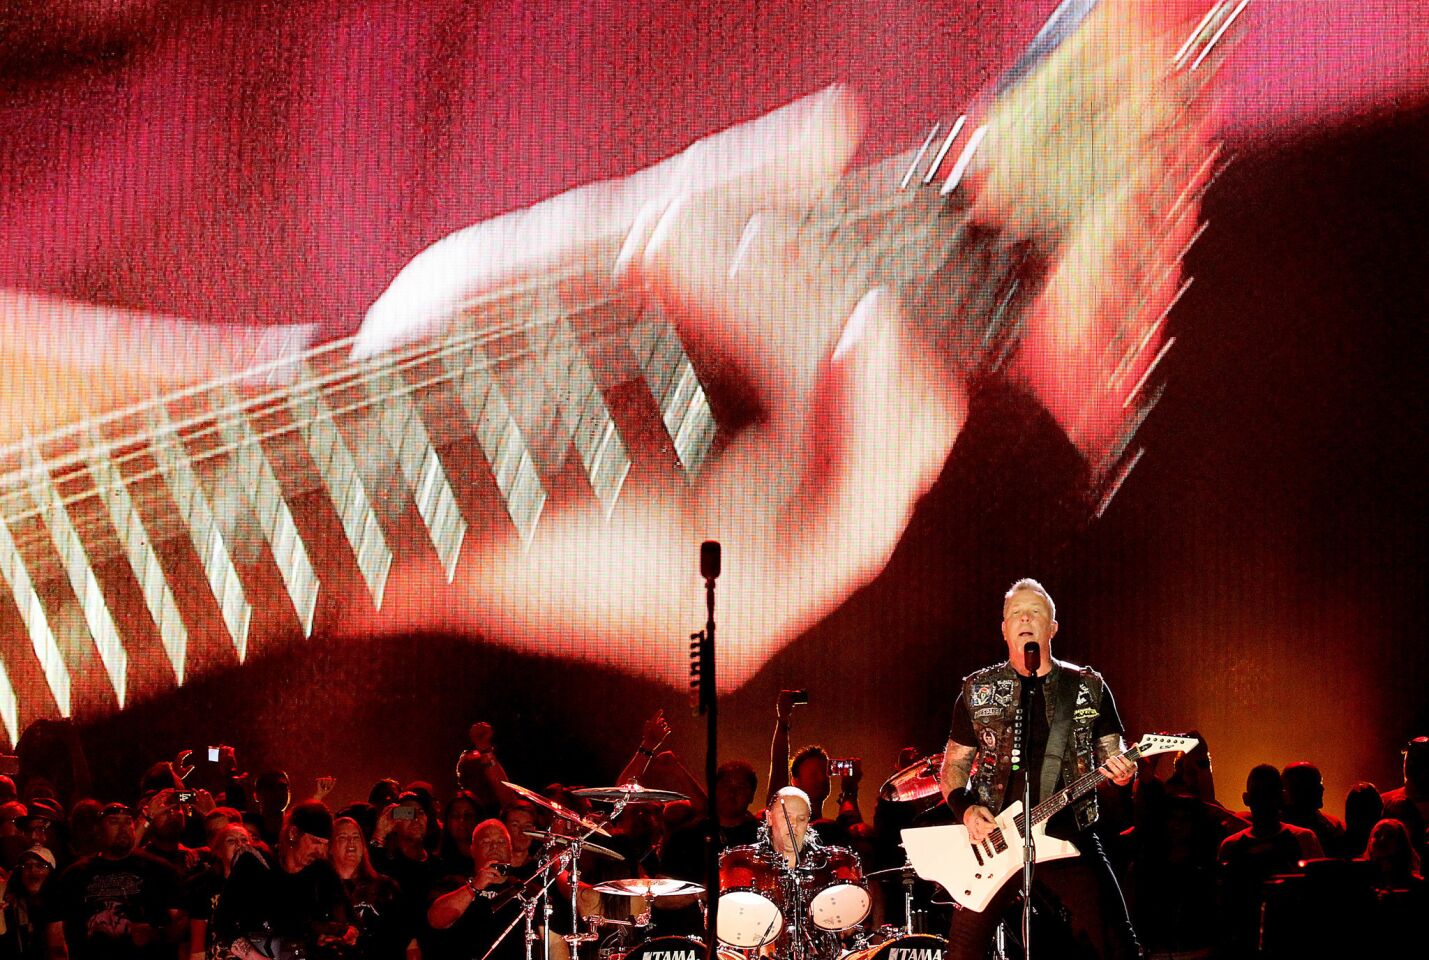 James Hatfield fronts Metallica at the Rock in Rio Festival in Las Vegas on May 9.